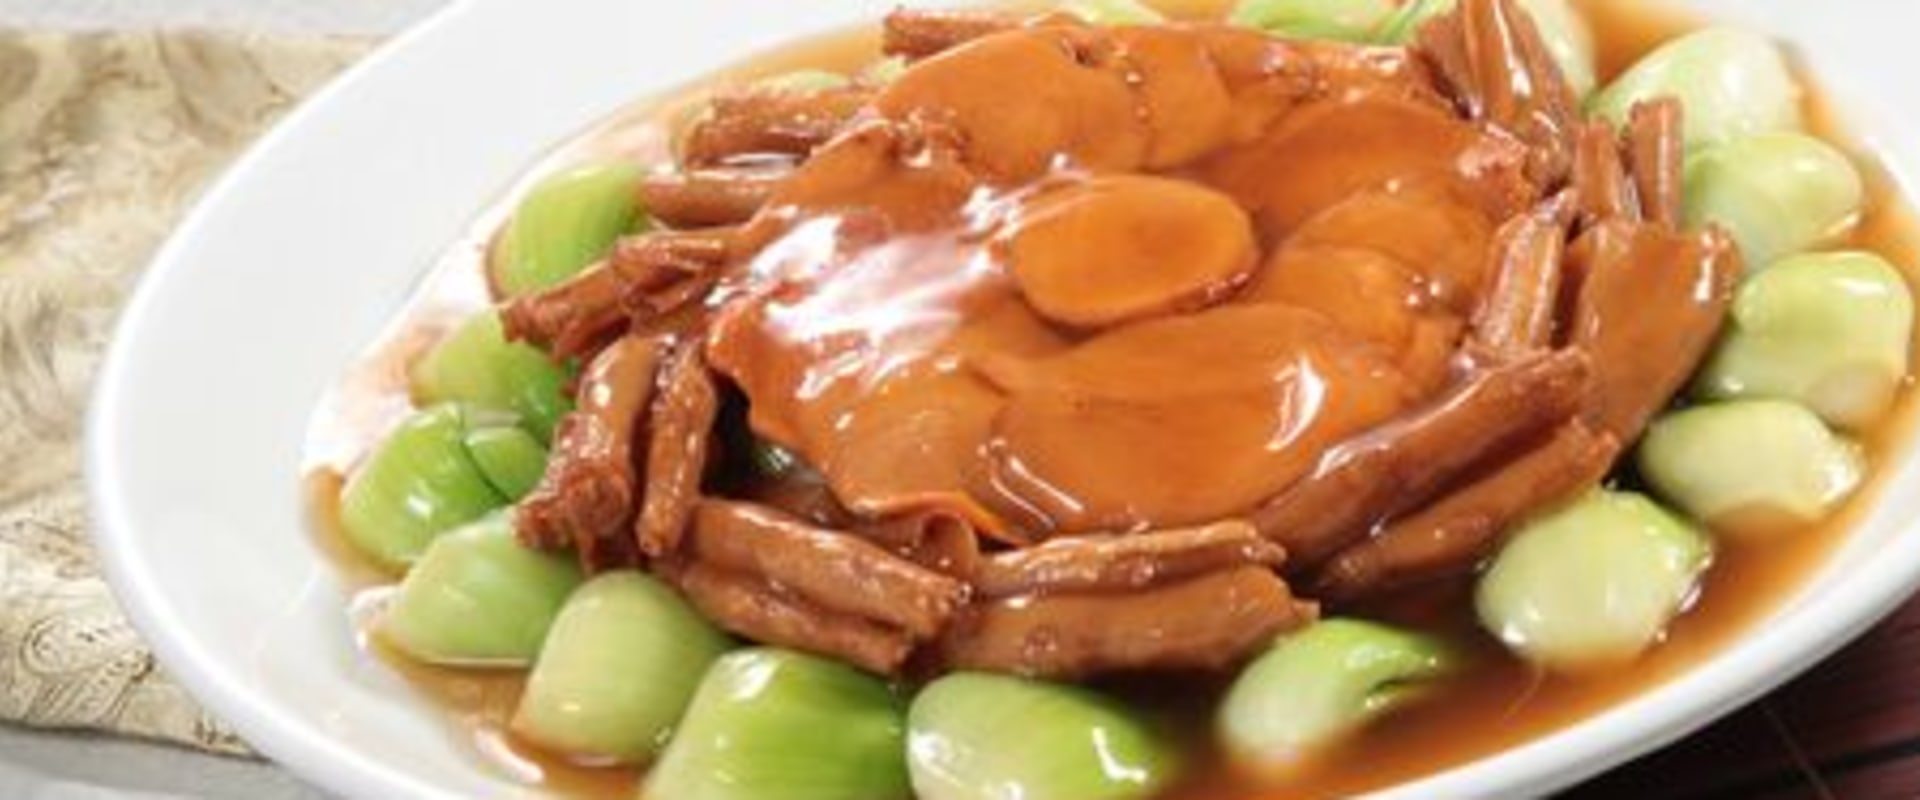 Stir-Fried Abalone with Vegetables: A Delicious and Authentic Chinese Recipe